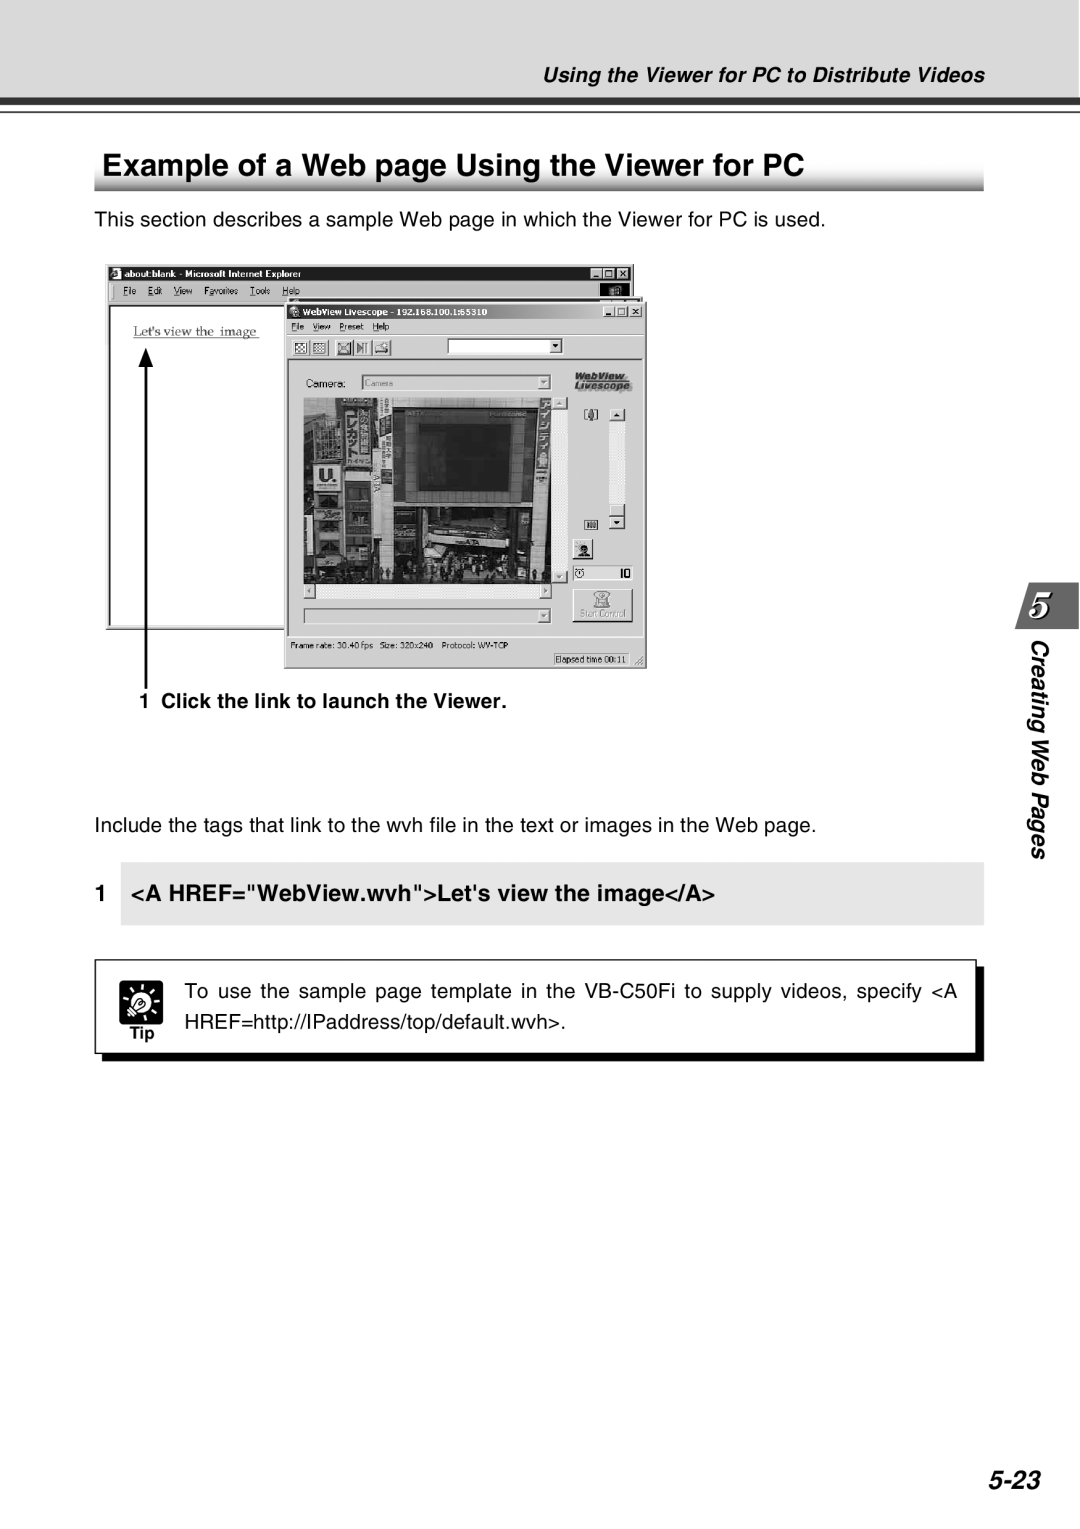 Canon Vb-C50fi user manual Example of a Web page Using the Viewer for PC, 5-23, Creating Web Pages 